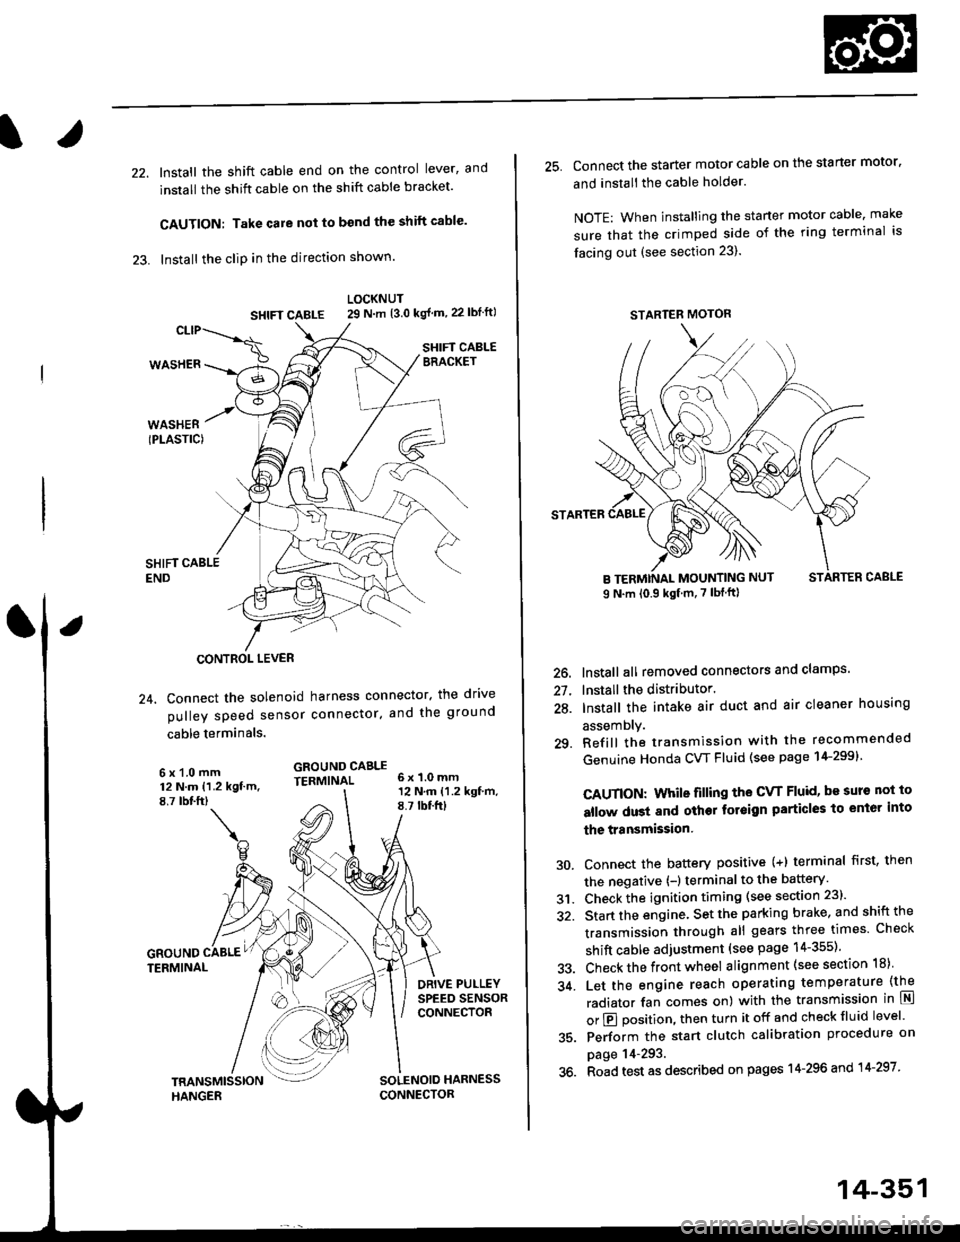 HONDA CIVIC 1997 6.G User Guide 22. Install the shift cable end on the control lever, and
install the shift cable on the shift cable bracket
CAUTION: Take care not to bend the shift cable
23. lnstall the clip in the direction show